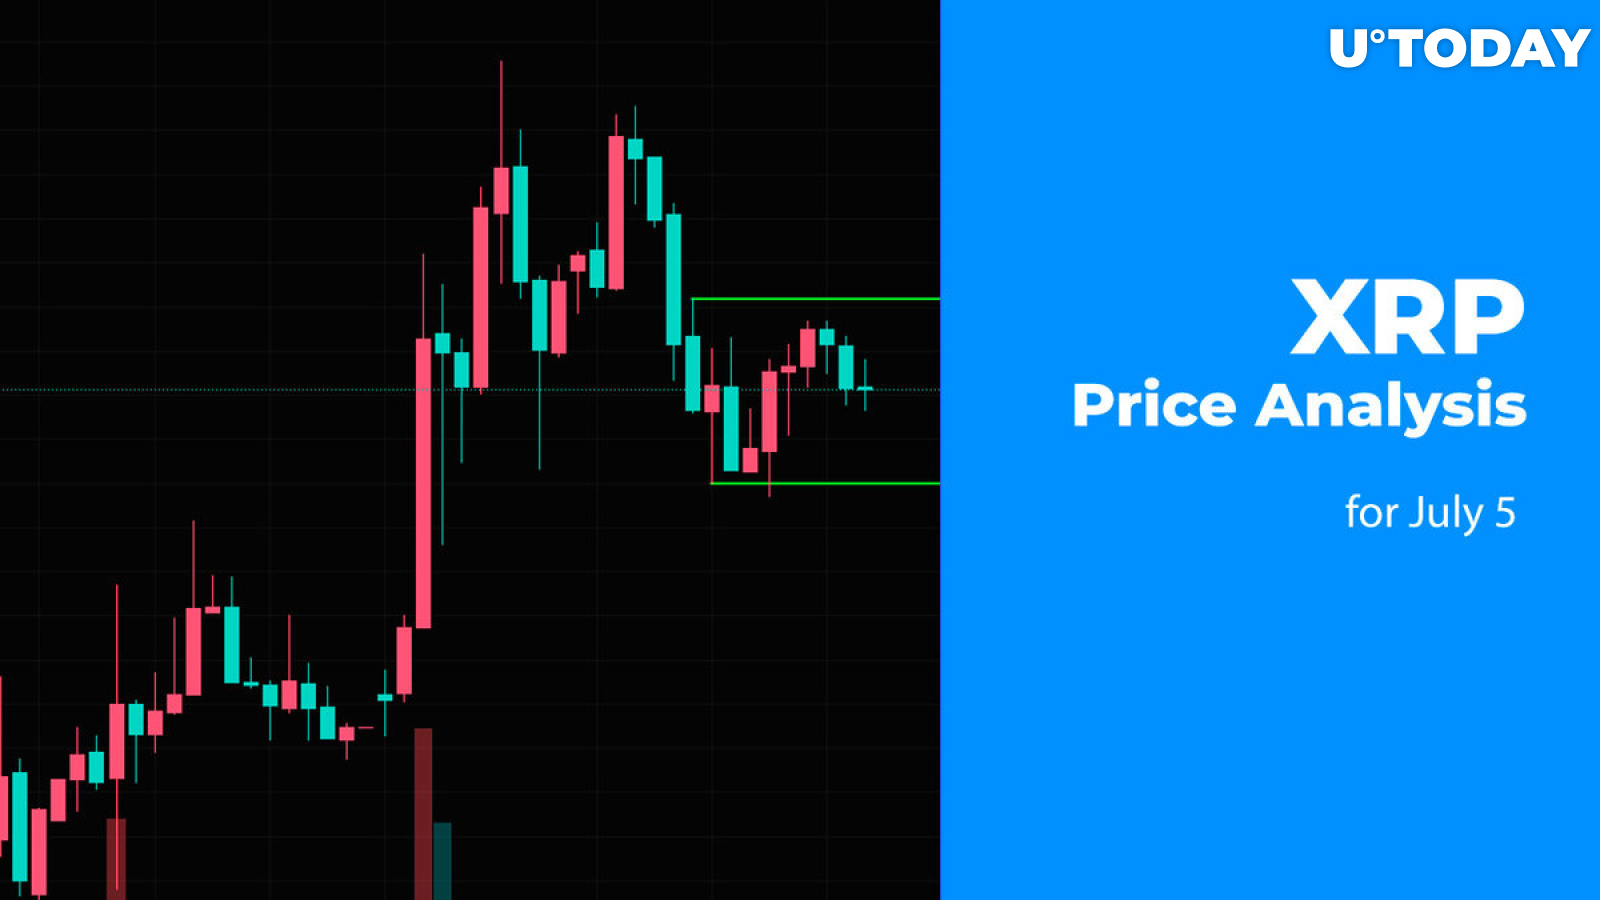 XRP Price Analysis for July 5